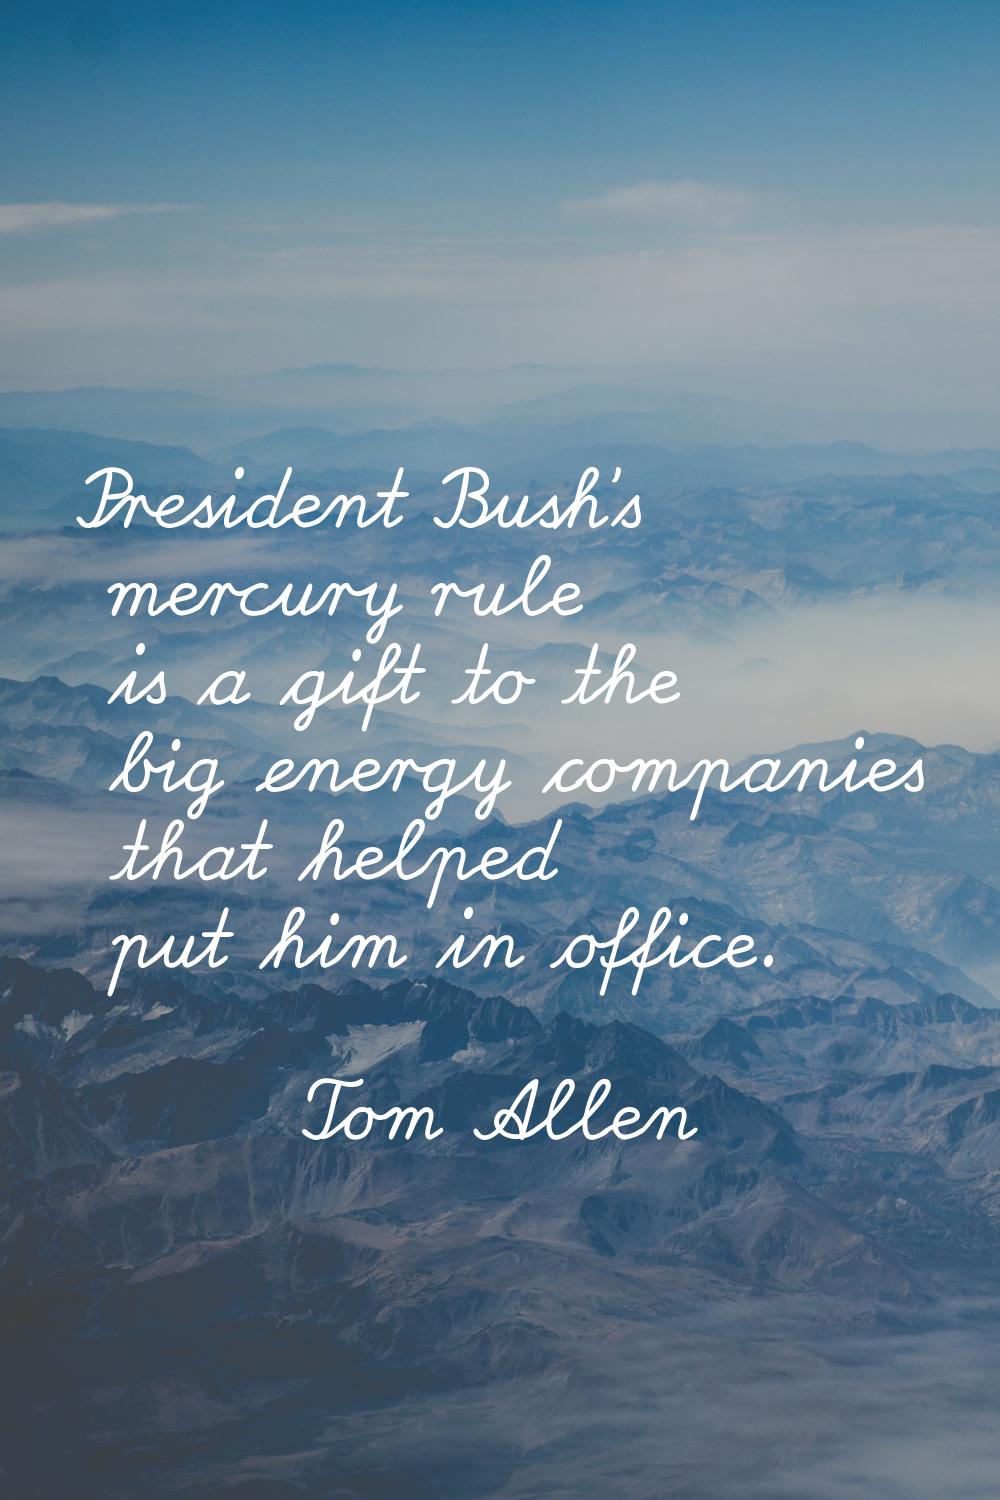 President Bush's mercury rule is a gift to the big energy companies that helped put him in office.